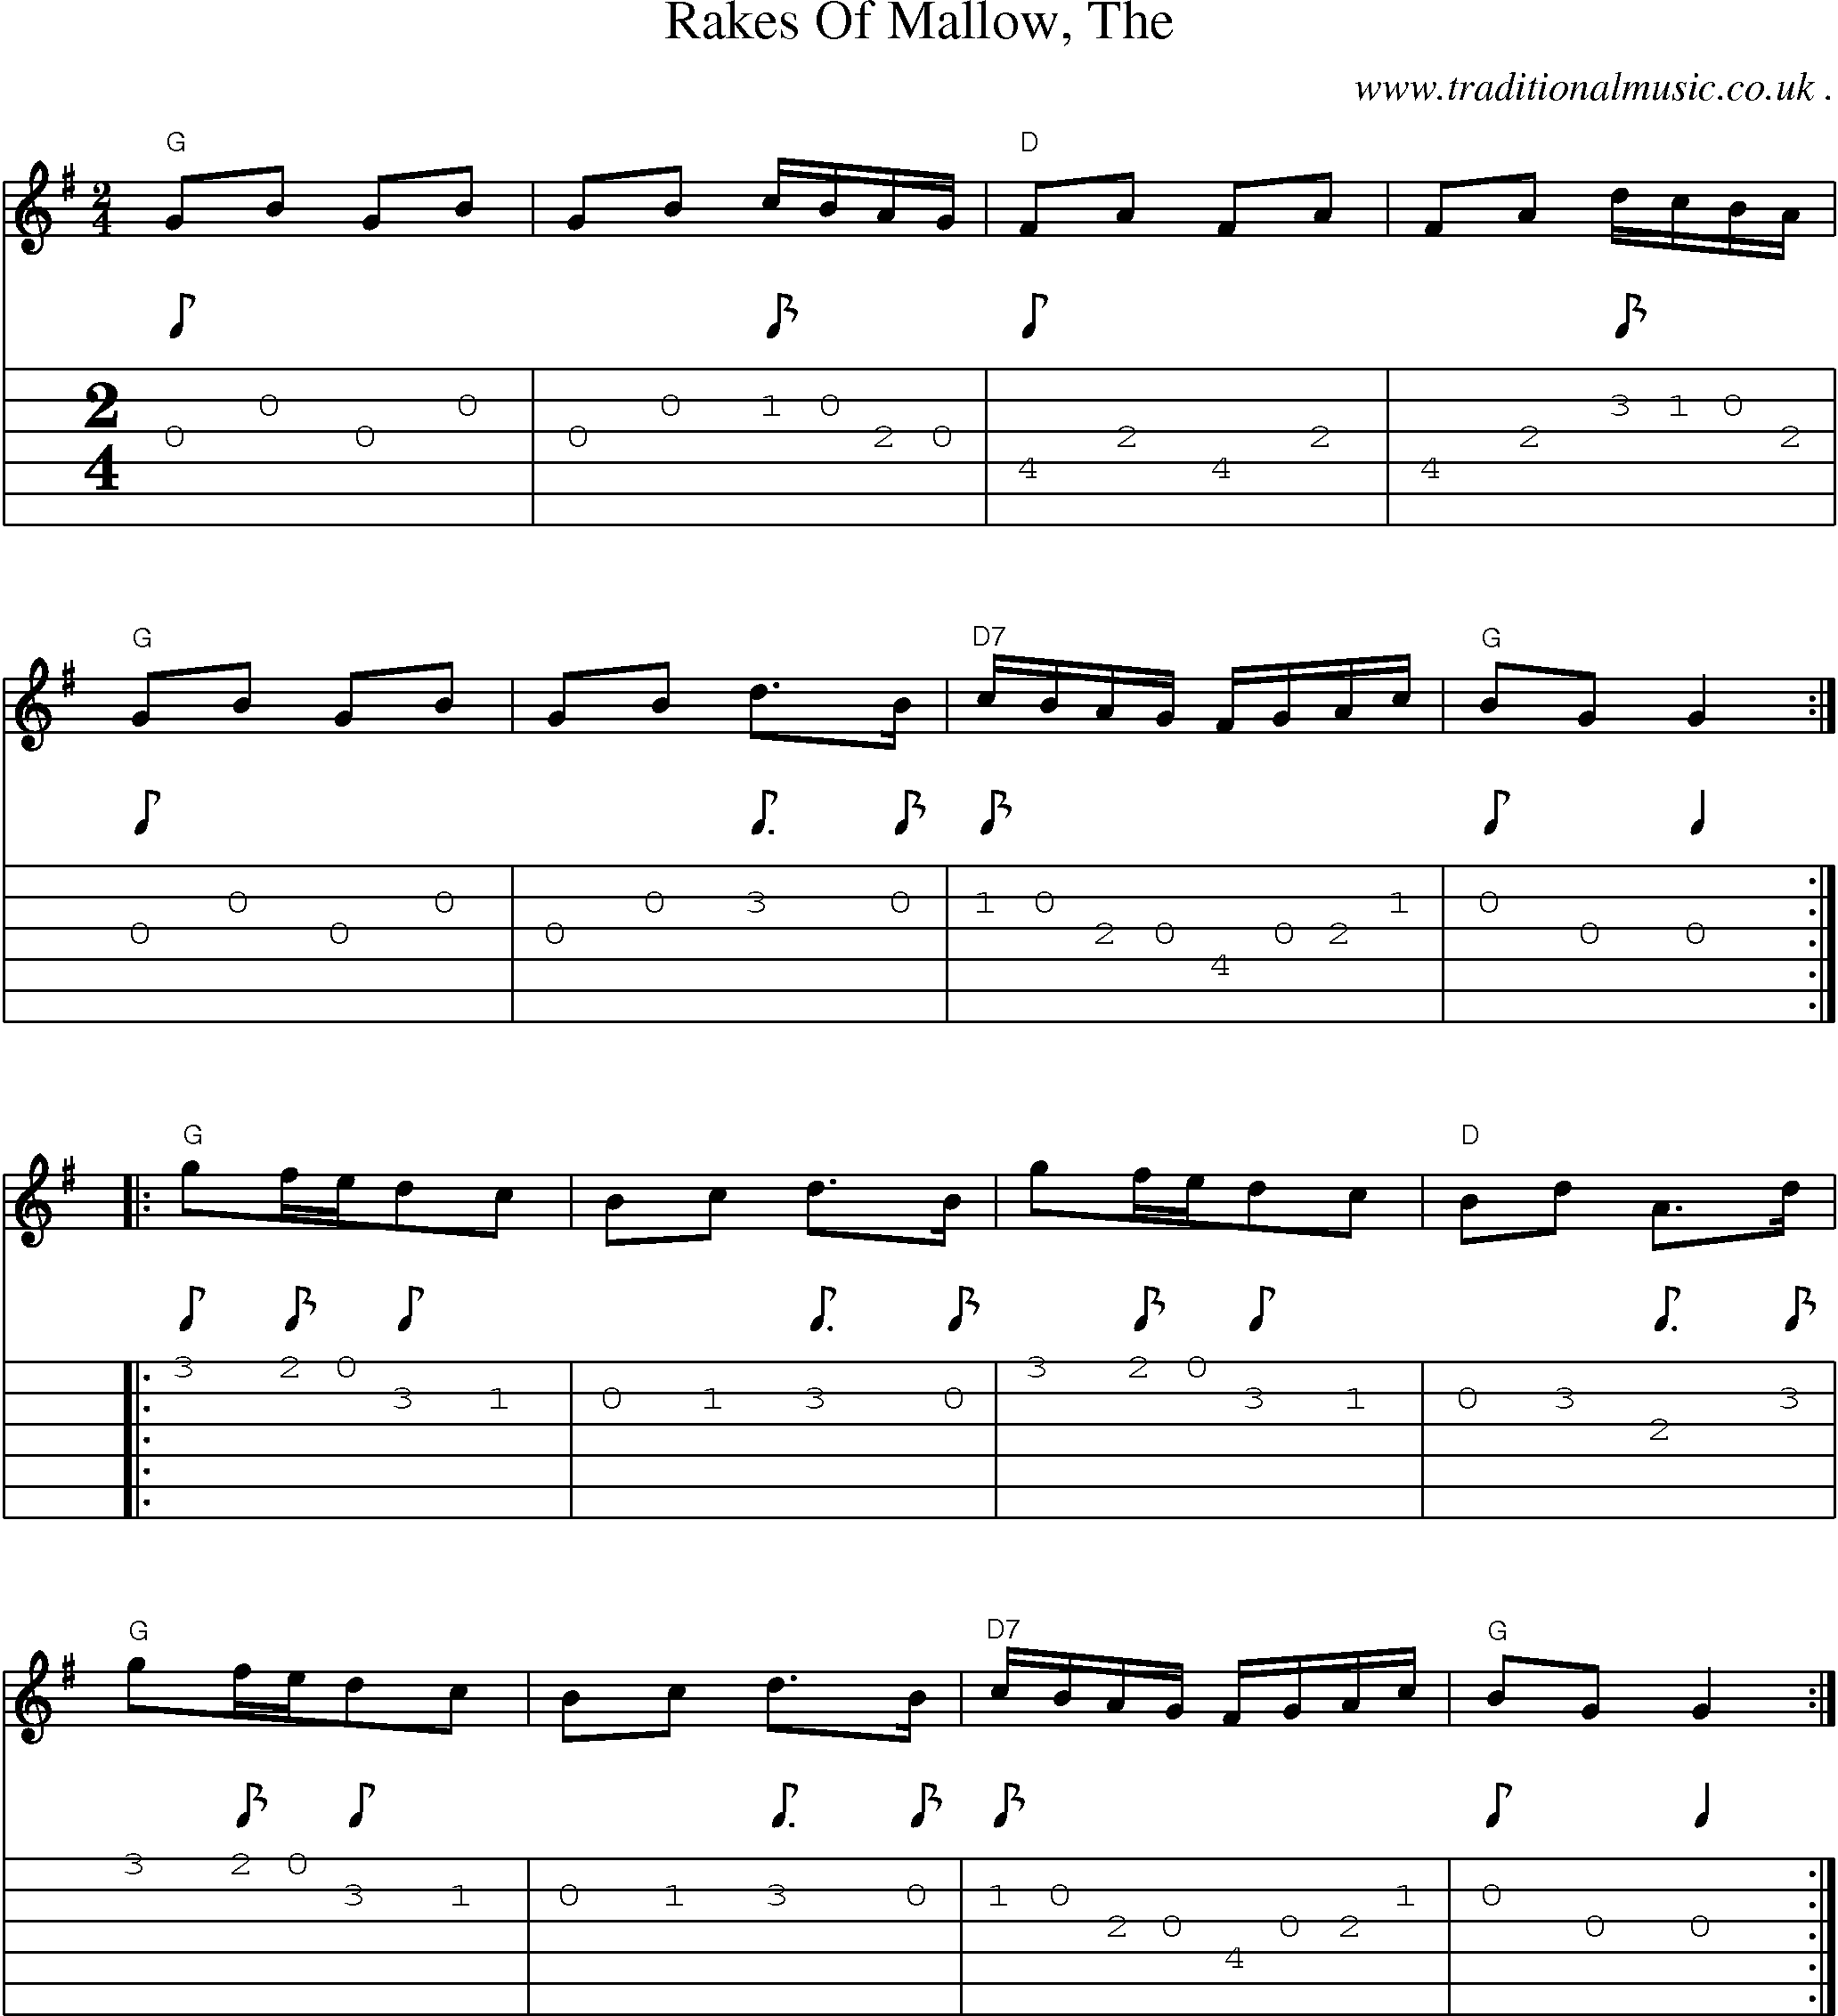 Music Score and Guitar Tabs for Rakes Of Mallow The